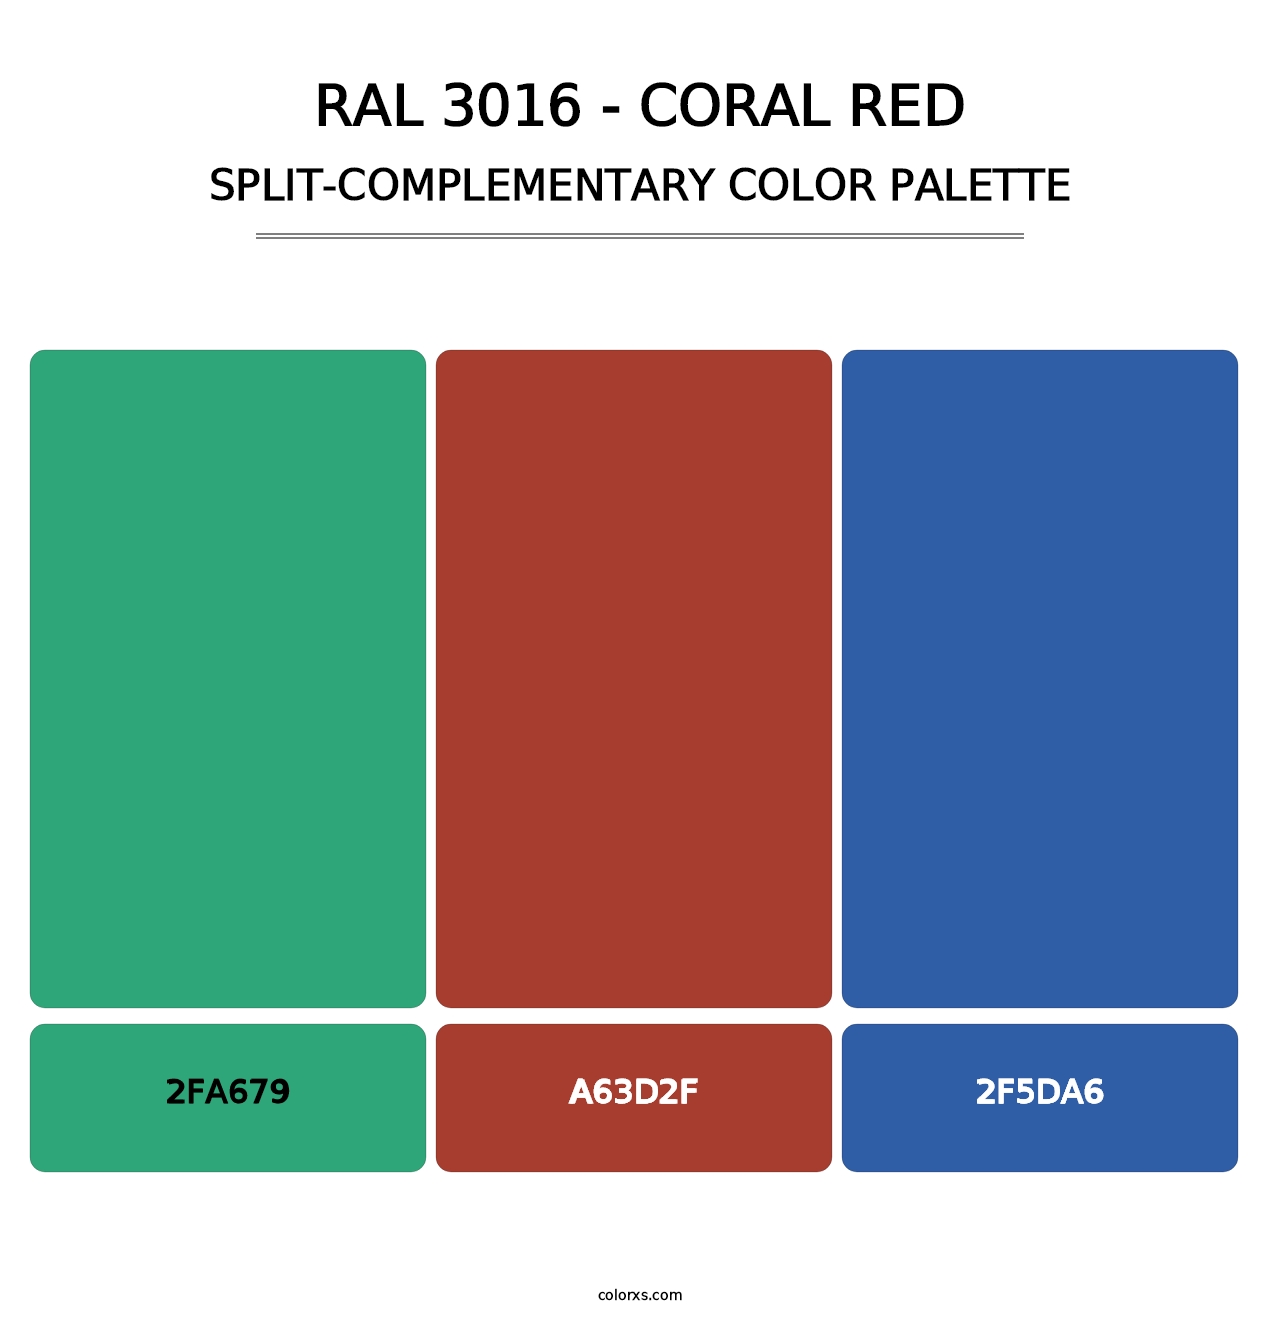 RAL 3016 - Coral Red - Split-Complementary Color Palette